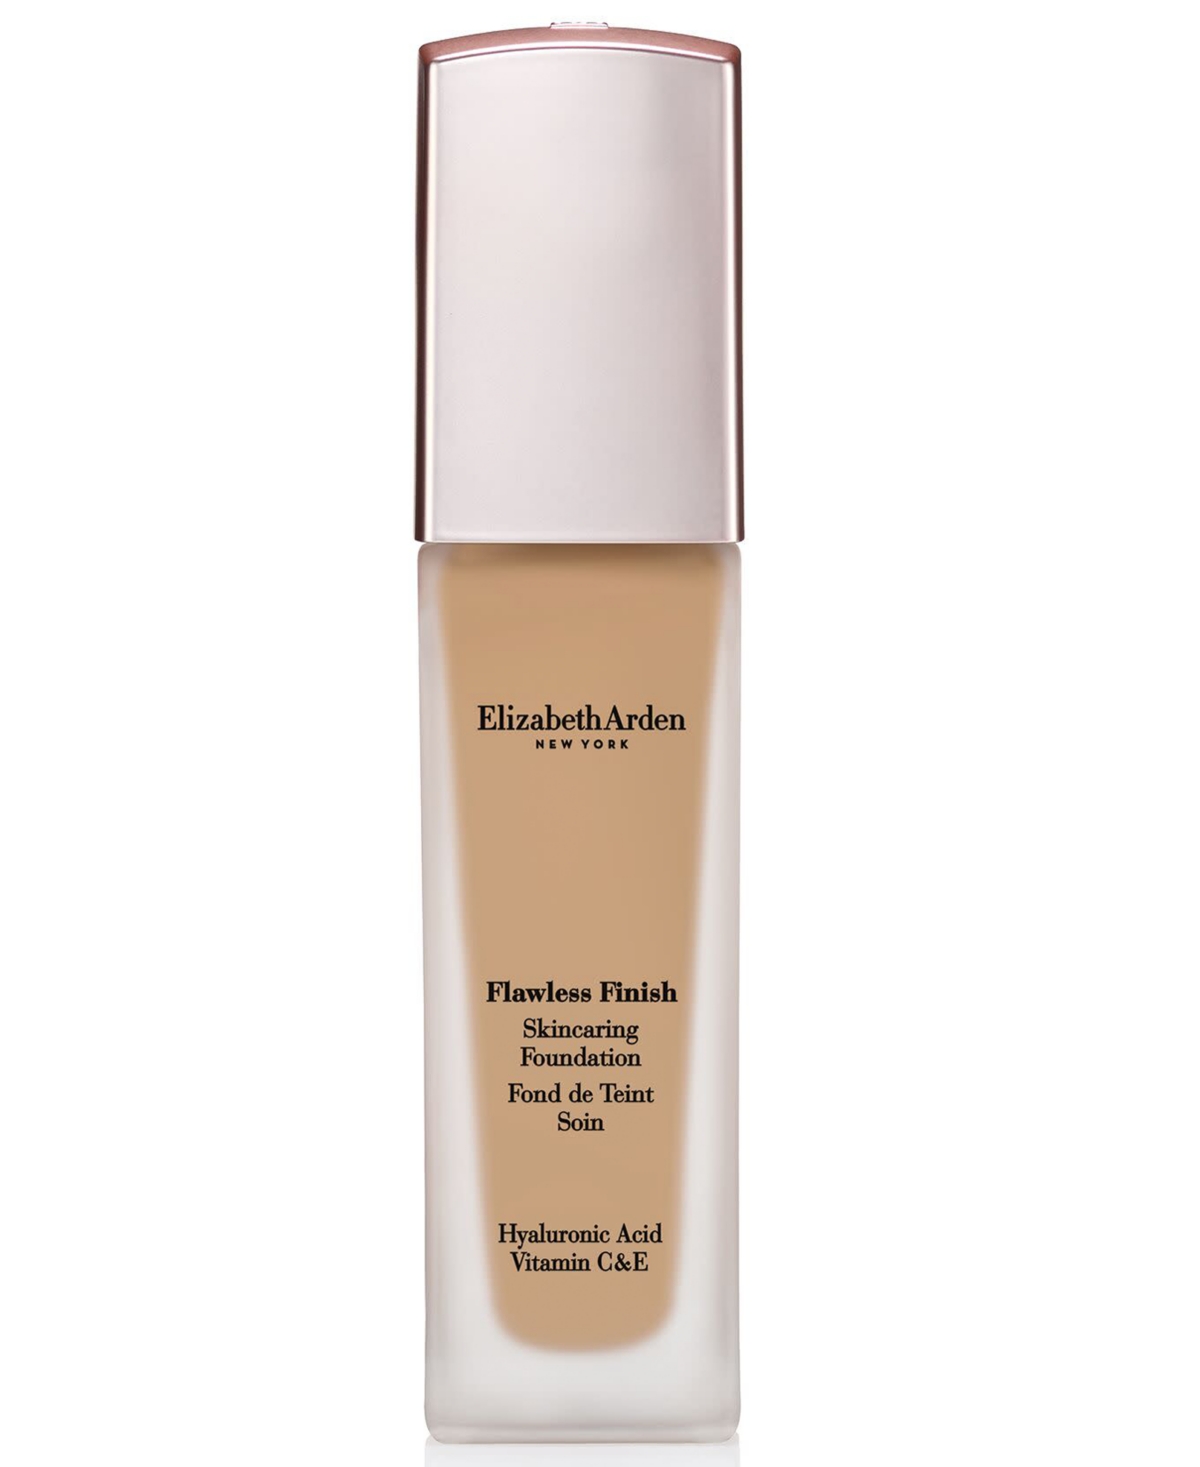 Flawless Finish Skincaring Foundation - C (Very deep skin with cool undertones)